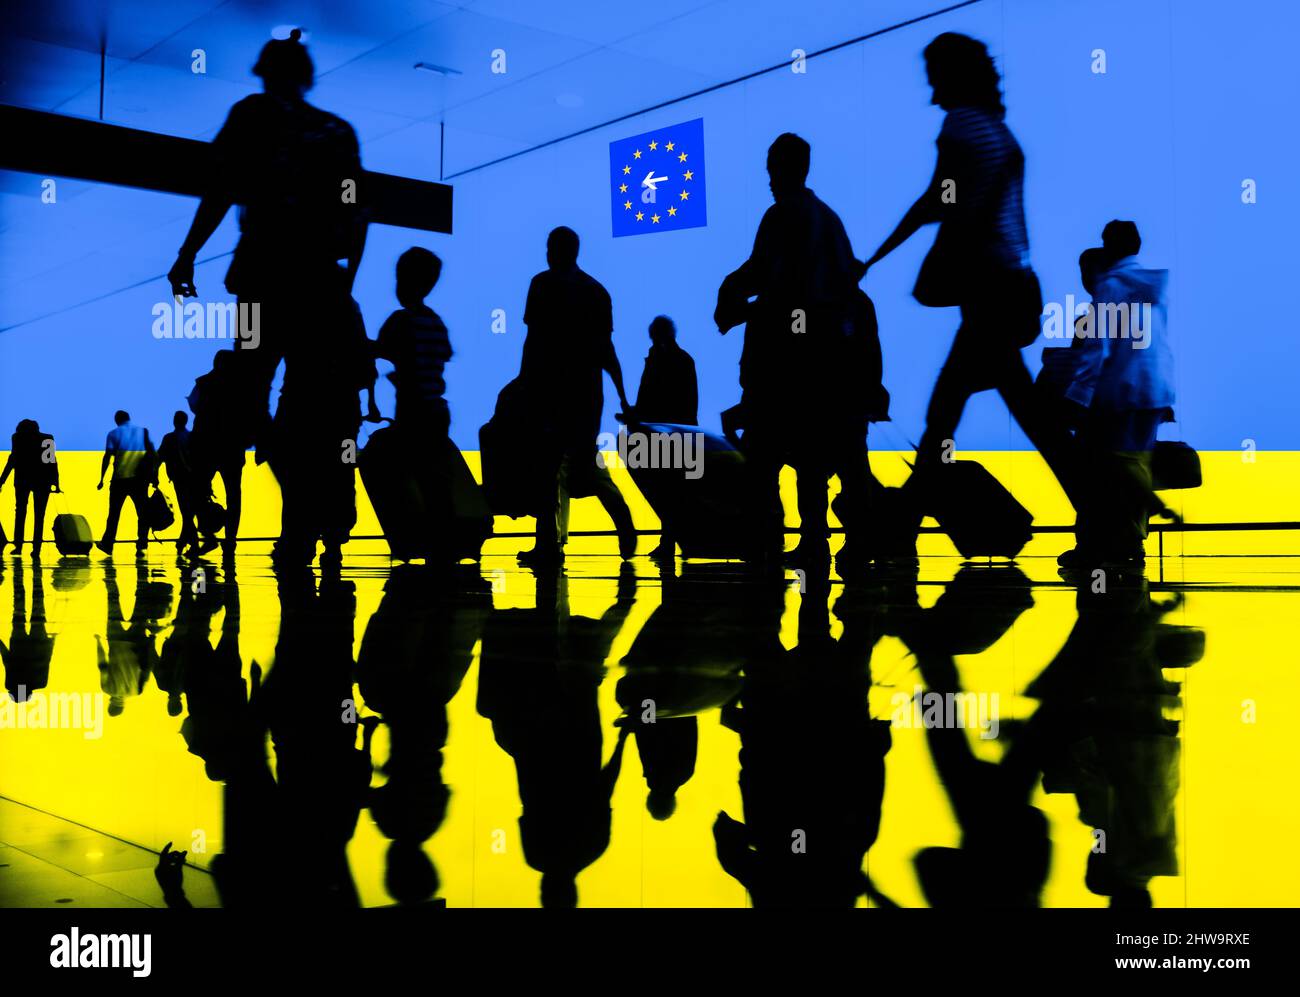 People and children with suitcases, flag of Ukraine overlayed. Russia Ukraine conflict war, refugees, EU, border control, Russian sanctions concept. Stock Photo